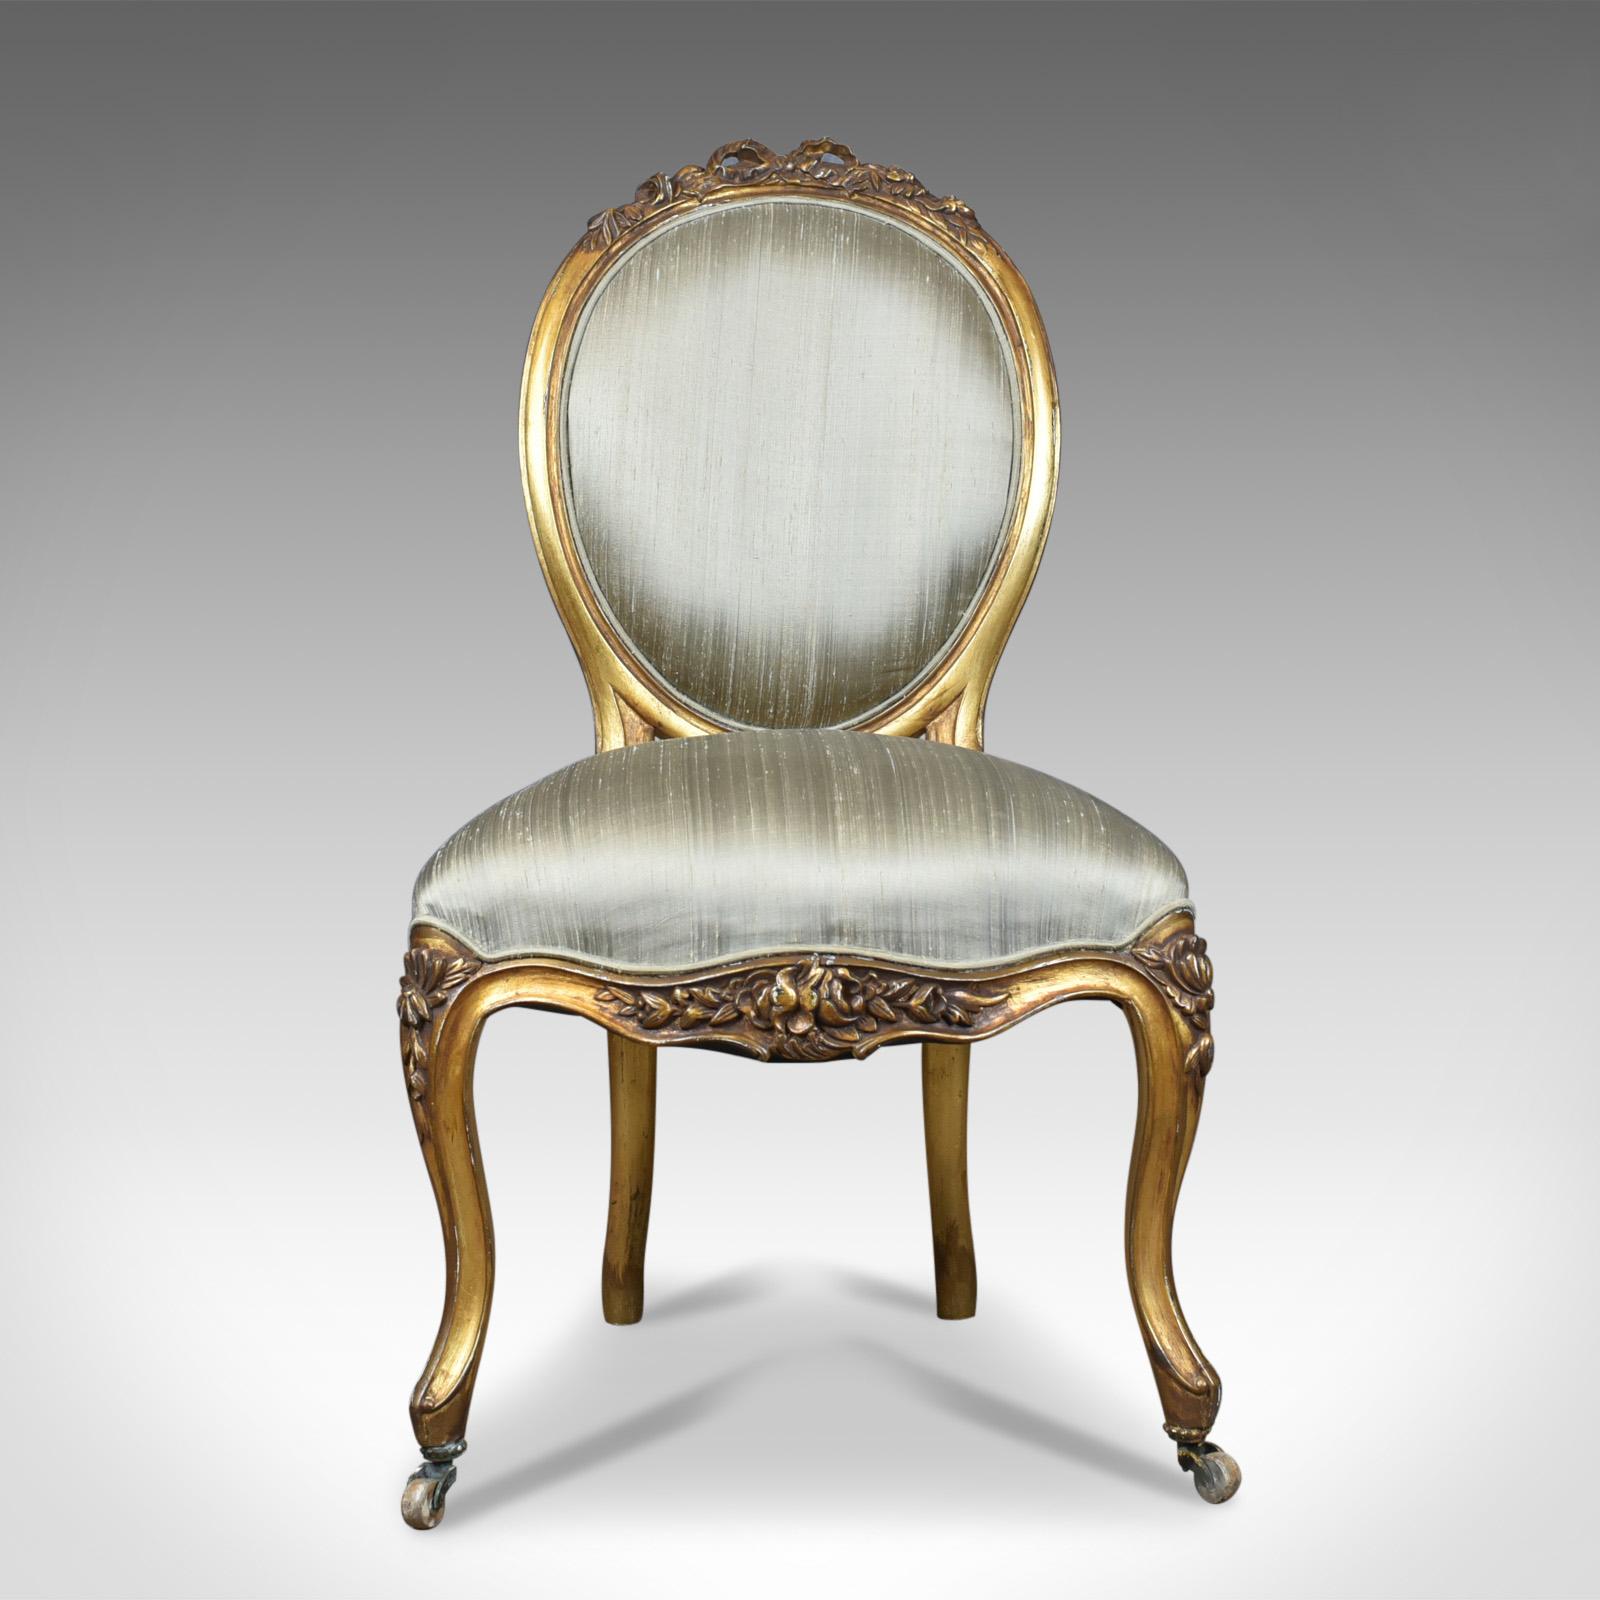 This is a vintage 20th century salon chair in the antique French taste, giltwood dating to circa 1970.

Attractive and comfortable salon chair
Elaborate giltwood frame
Decorated with ribbon and foliate detail

Cabriole legs to the front with